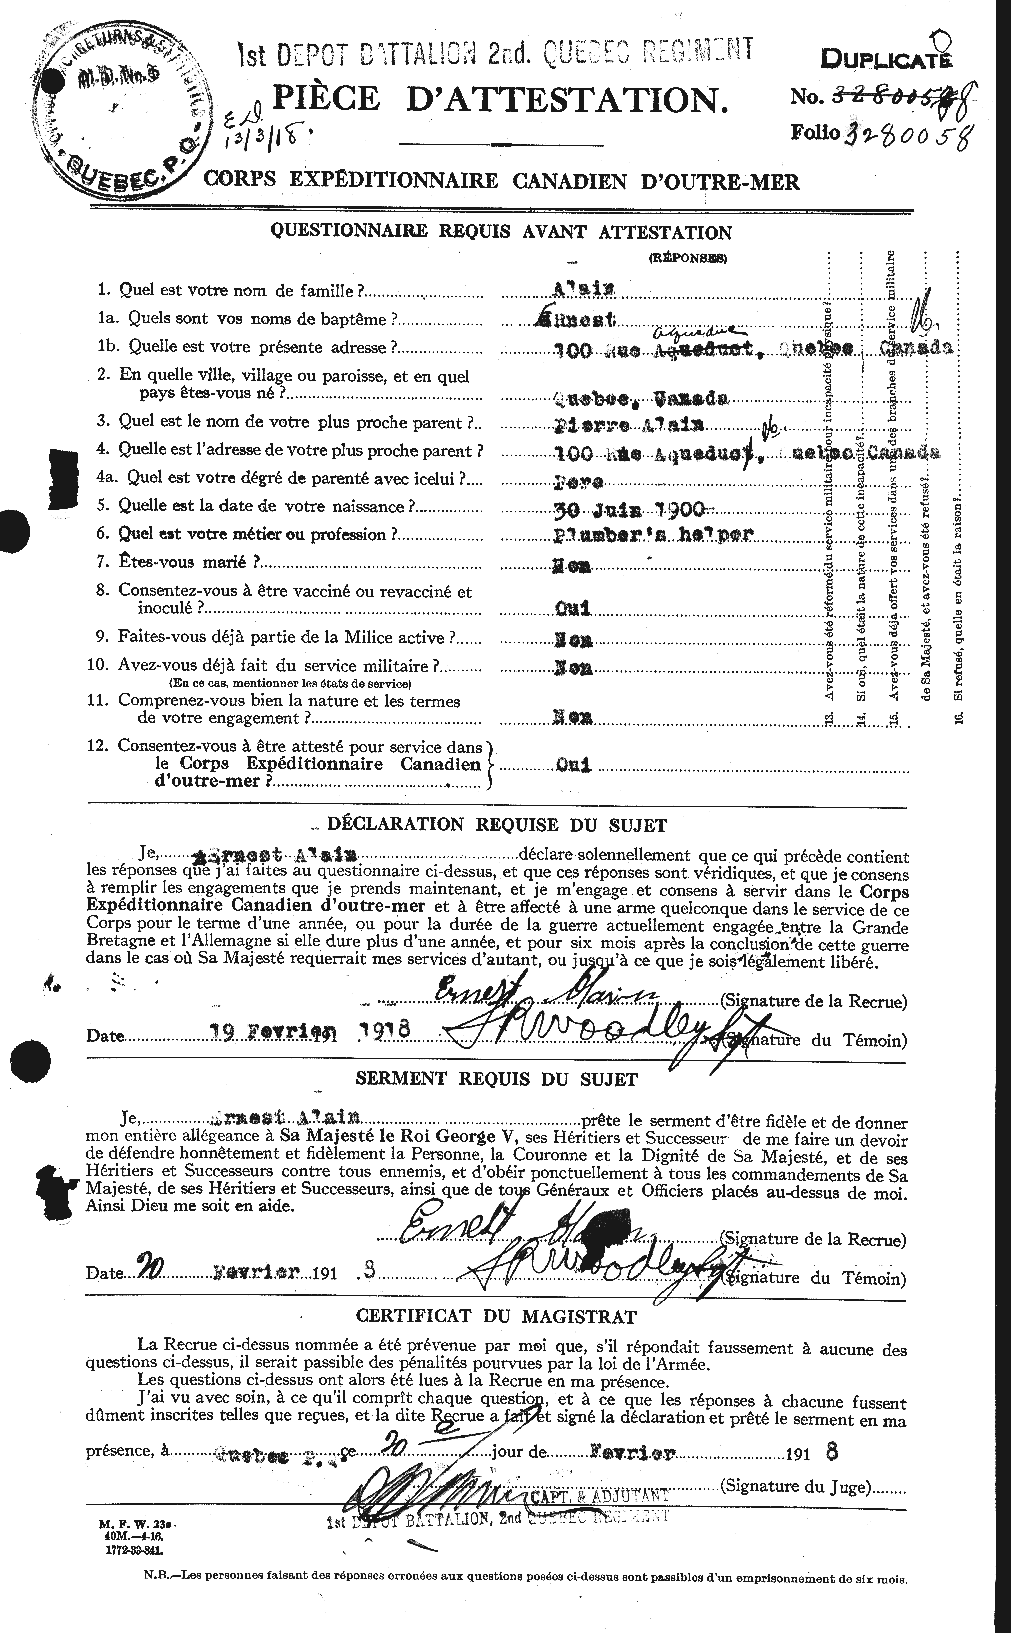 Personnel Records of the First World War - CEF 204493a